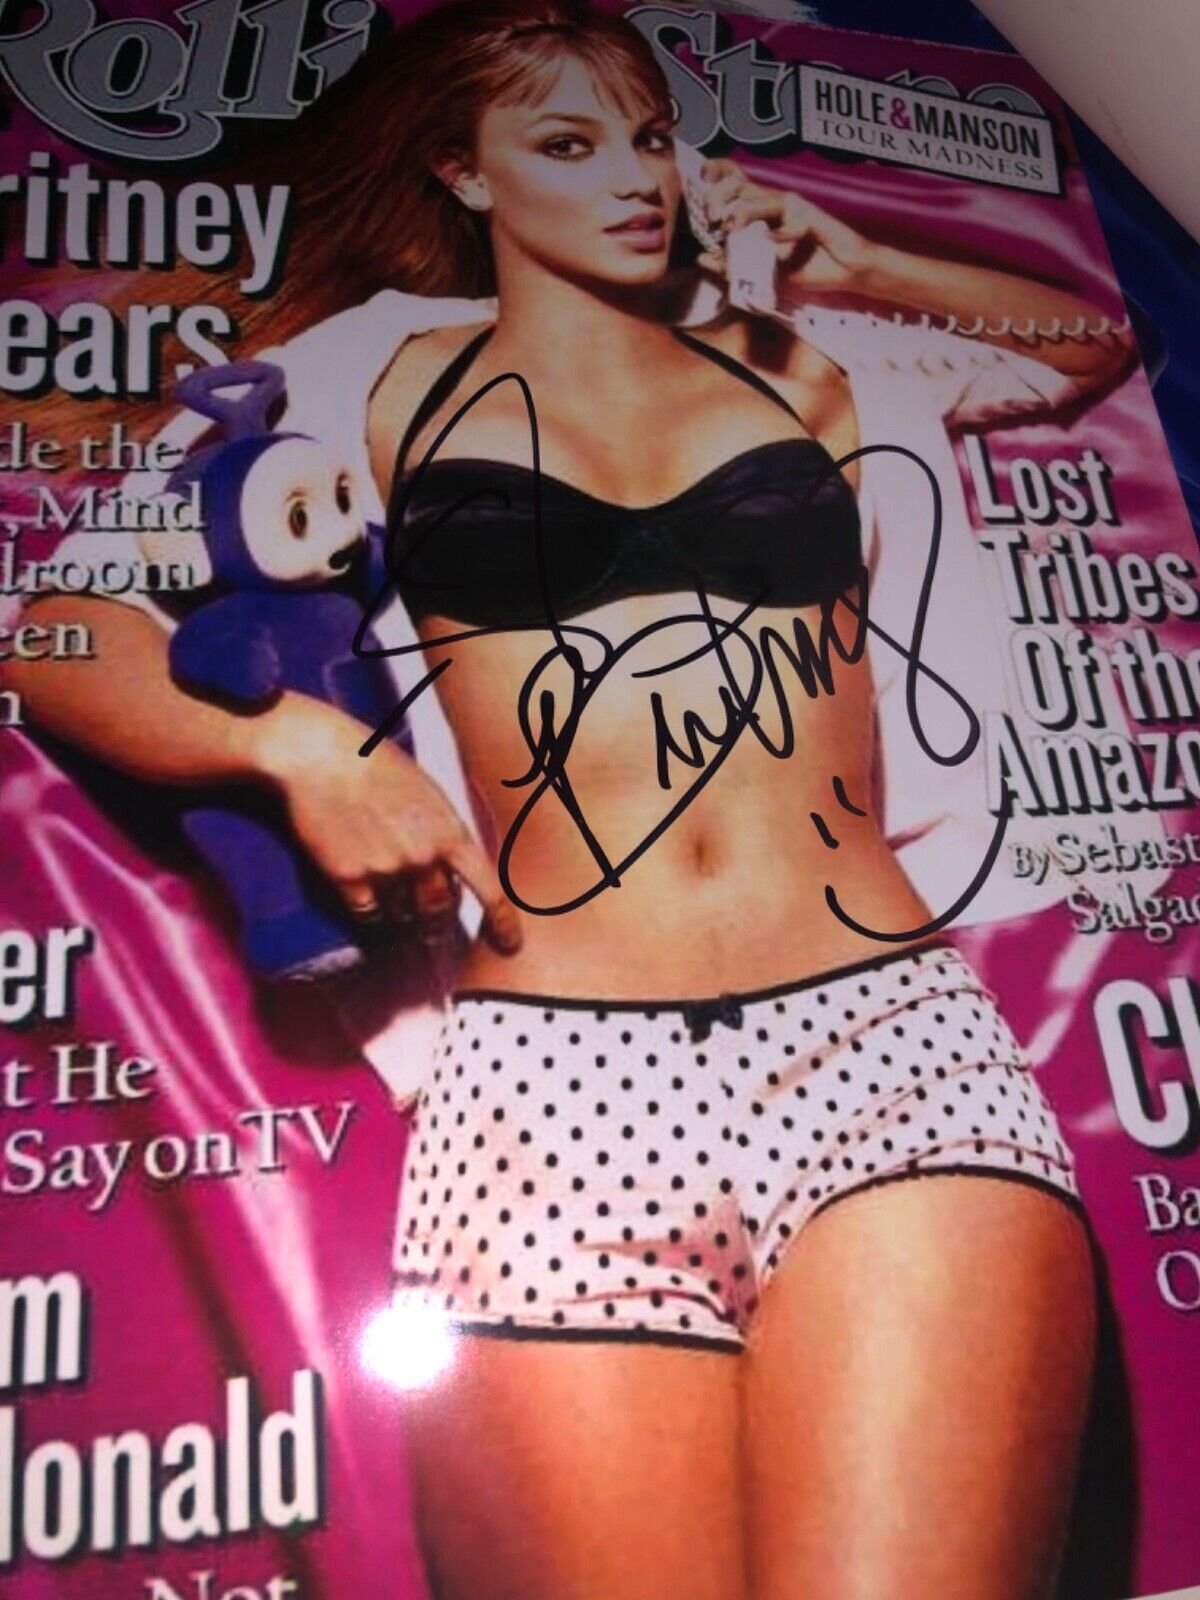 Britney Spears Signed 8 x10 Photo Poster painting sexy picture super duper hot hott